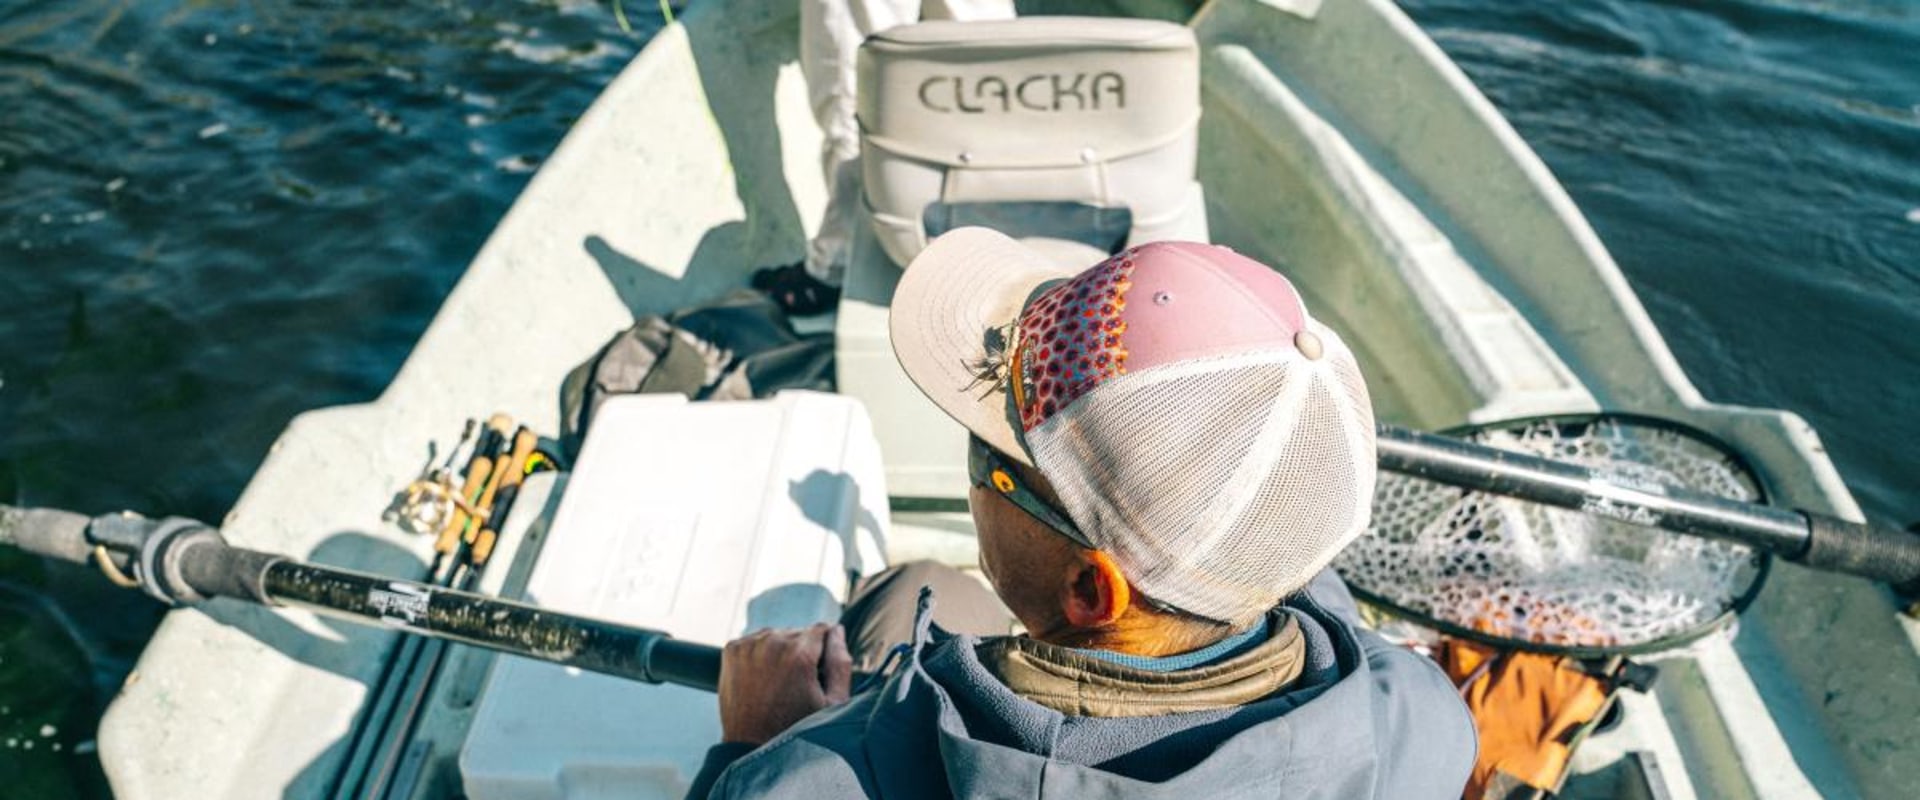 What is an appropriate tip for a fishing charter?